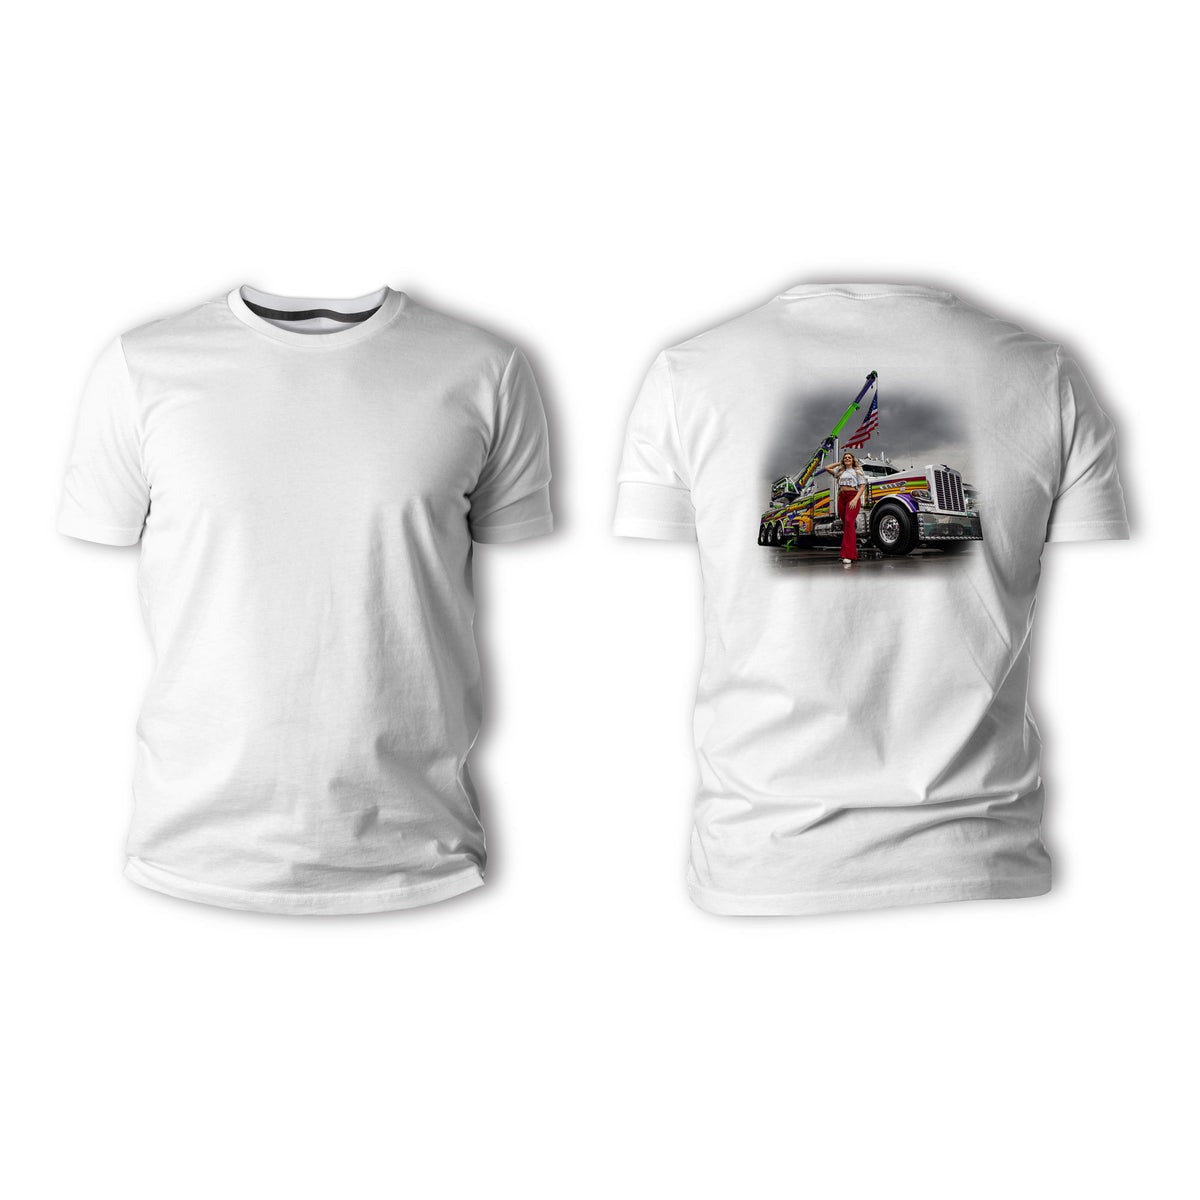 Towing America Shirts and Hoodies